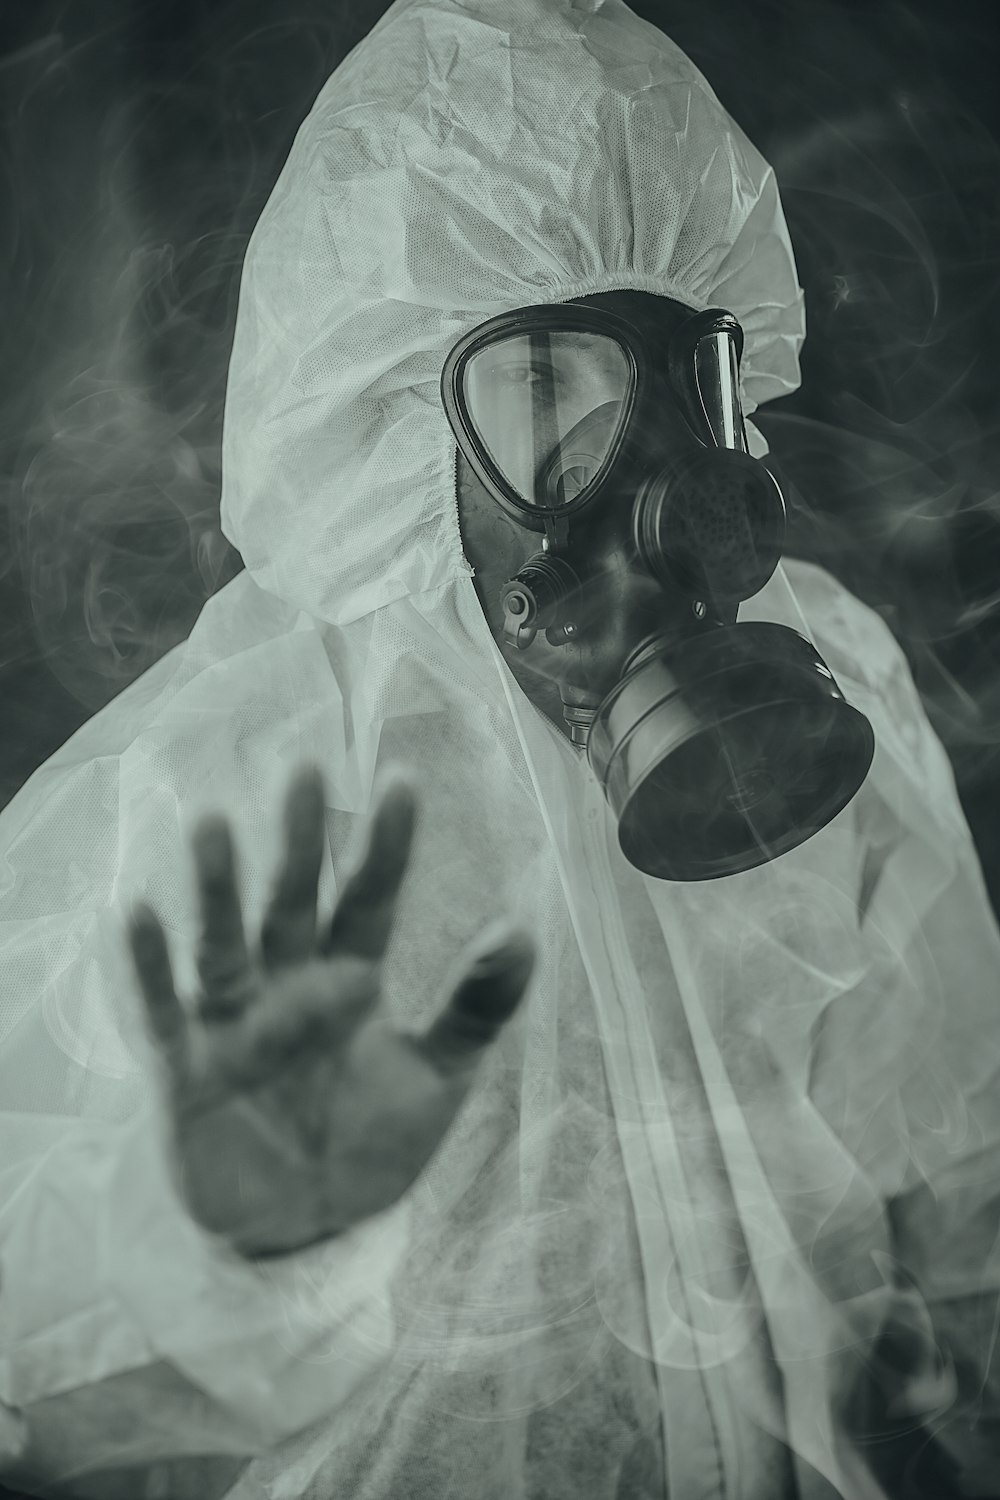 person wearing gas mask in grayscale photography